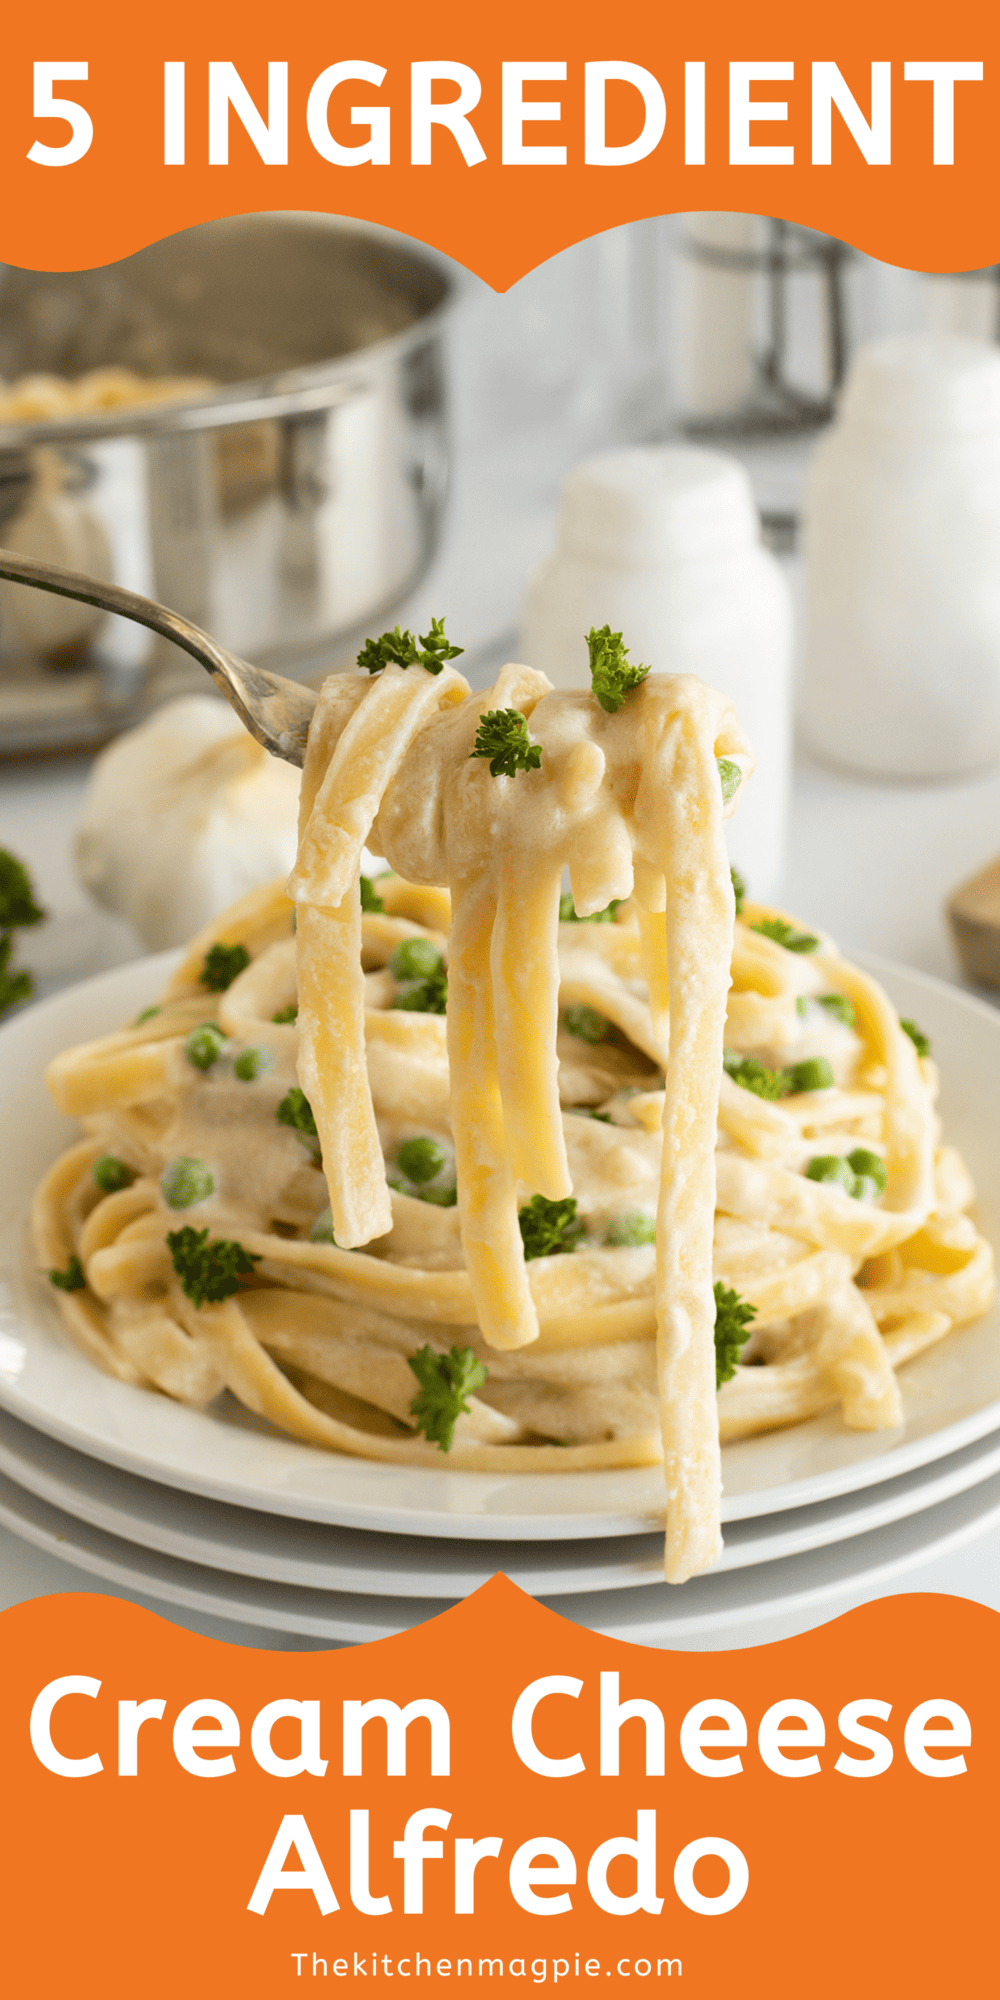 Only 5 ingredients and you have an amazing Alfredo Sauce With Cream Cheese! The cream cheese adds a lovely tang and creaminess to the sauce.